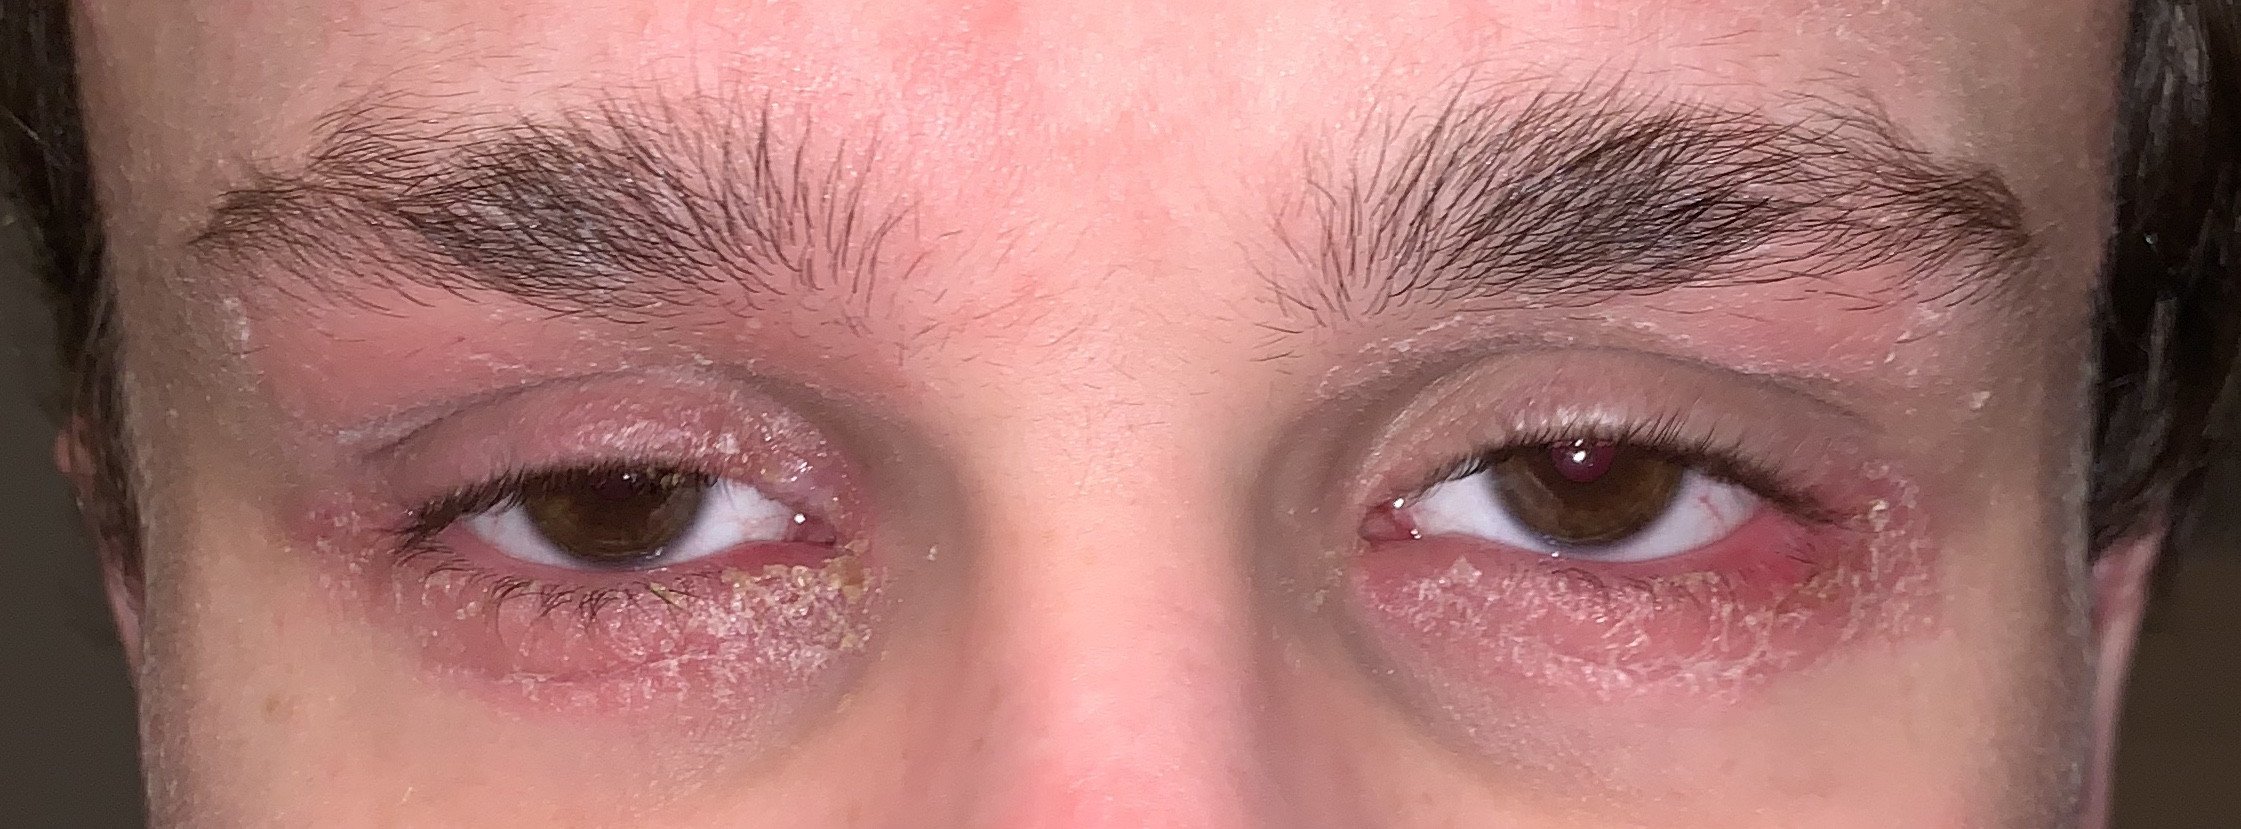 I can hardly open my eyes anymore... : eczema